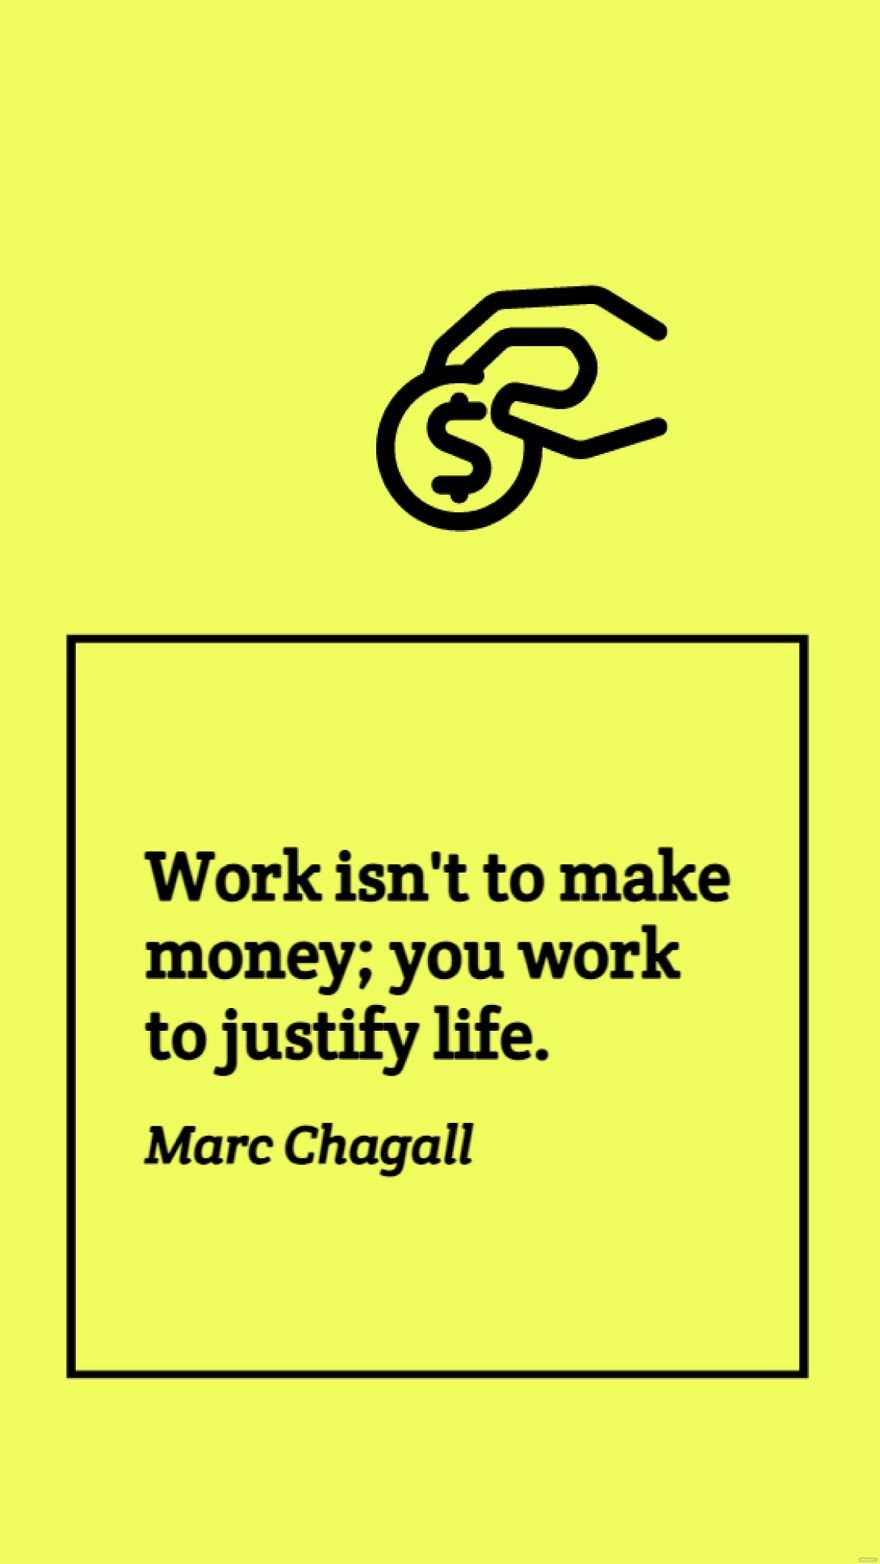 Marc Chagall - Work isn't to make money; you work to justify life.